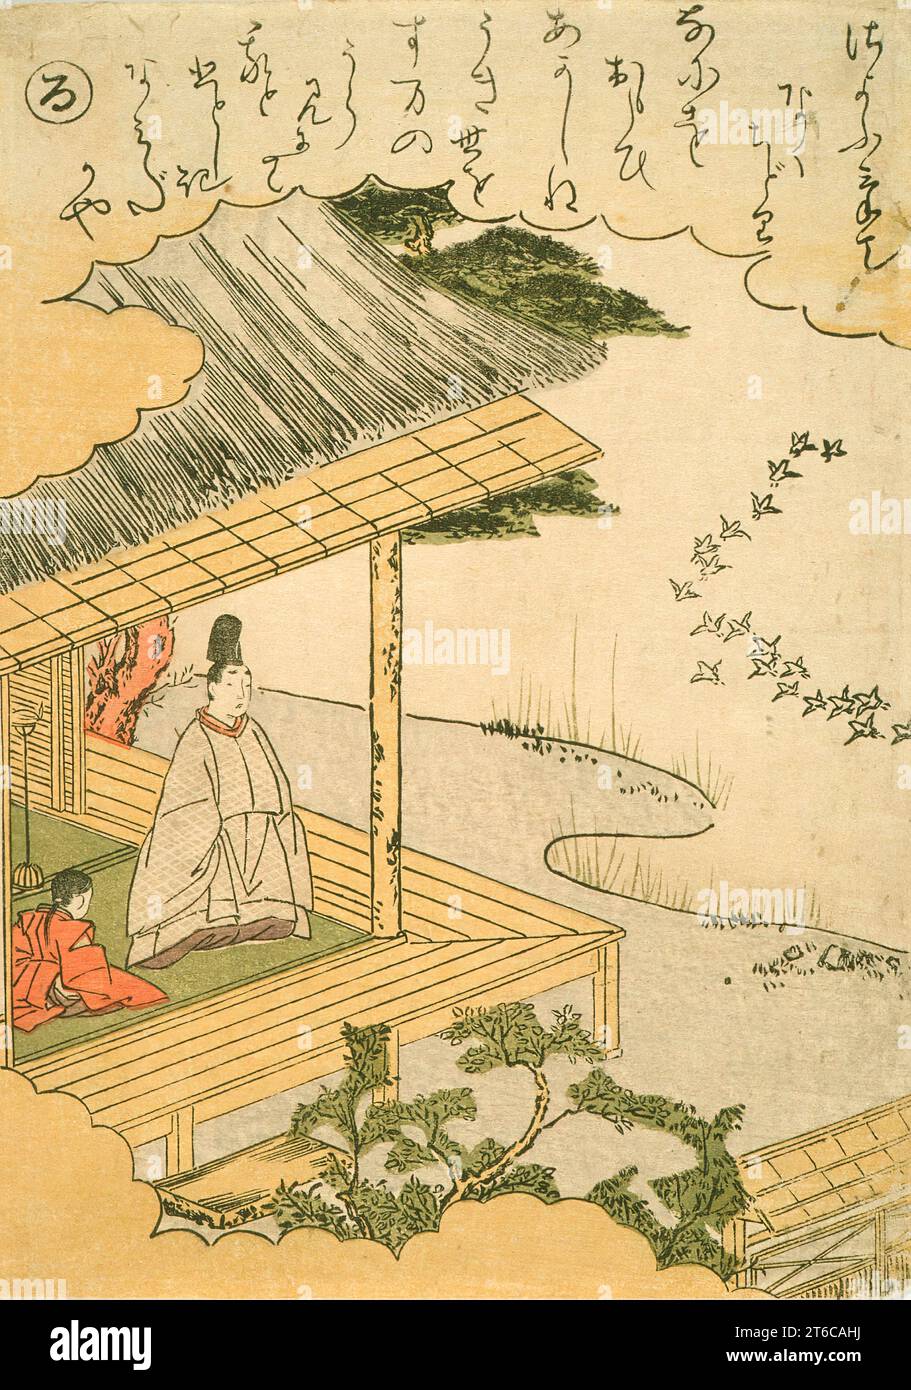 Narihira at the Sumida River Watching Capital Birds, c1766. From Tales of Ise in Iroha Order. Stock Photo